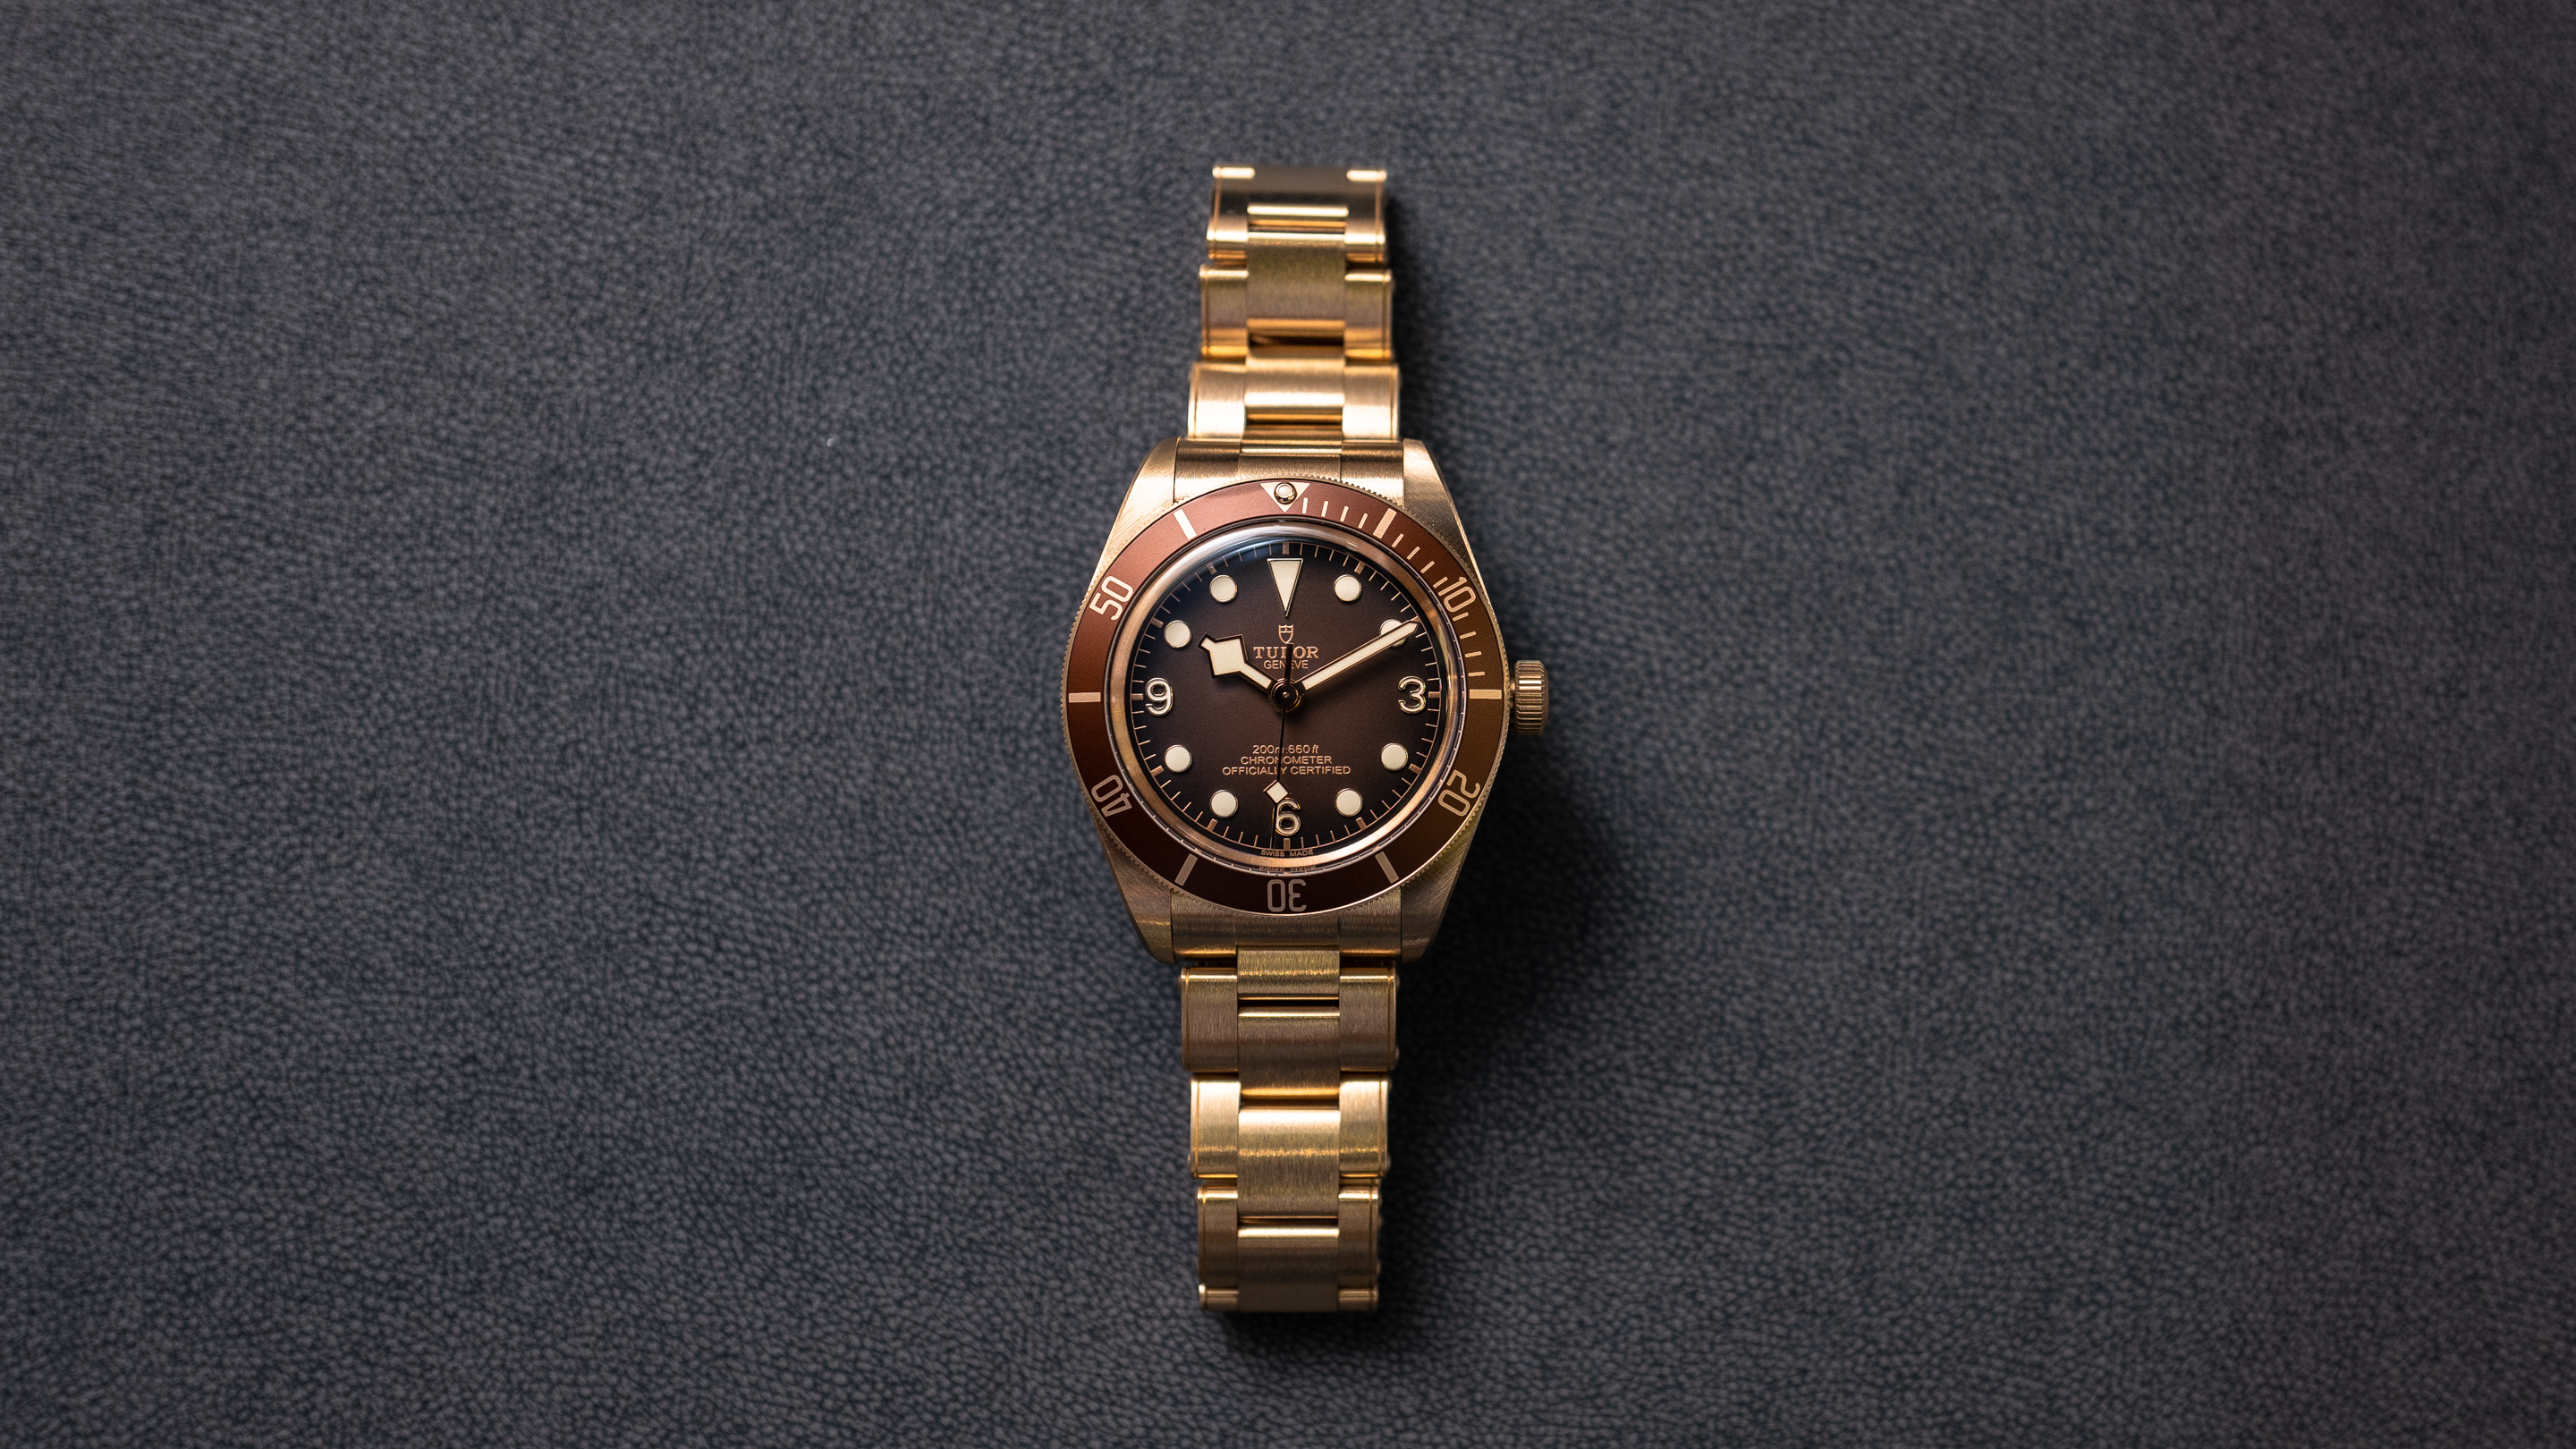 Introducing: Whoa, The Tudor Black Bay Fifty-Eight Is Now Fully 